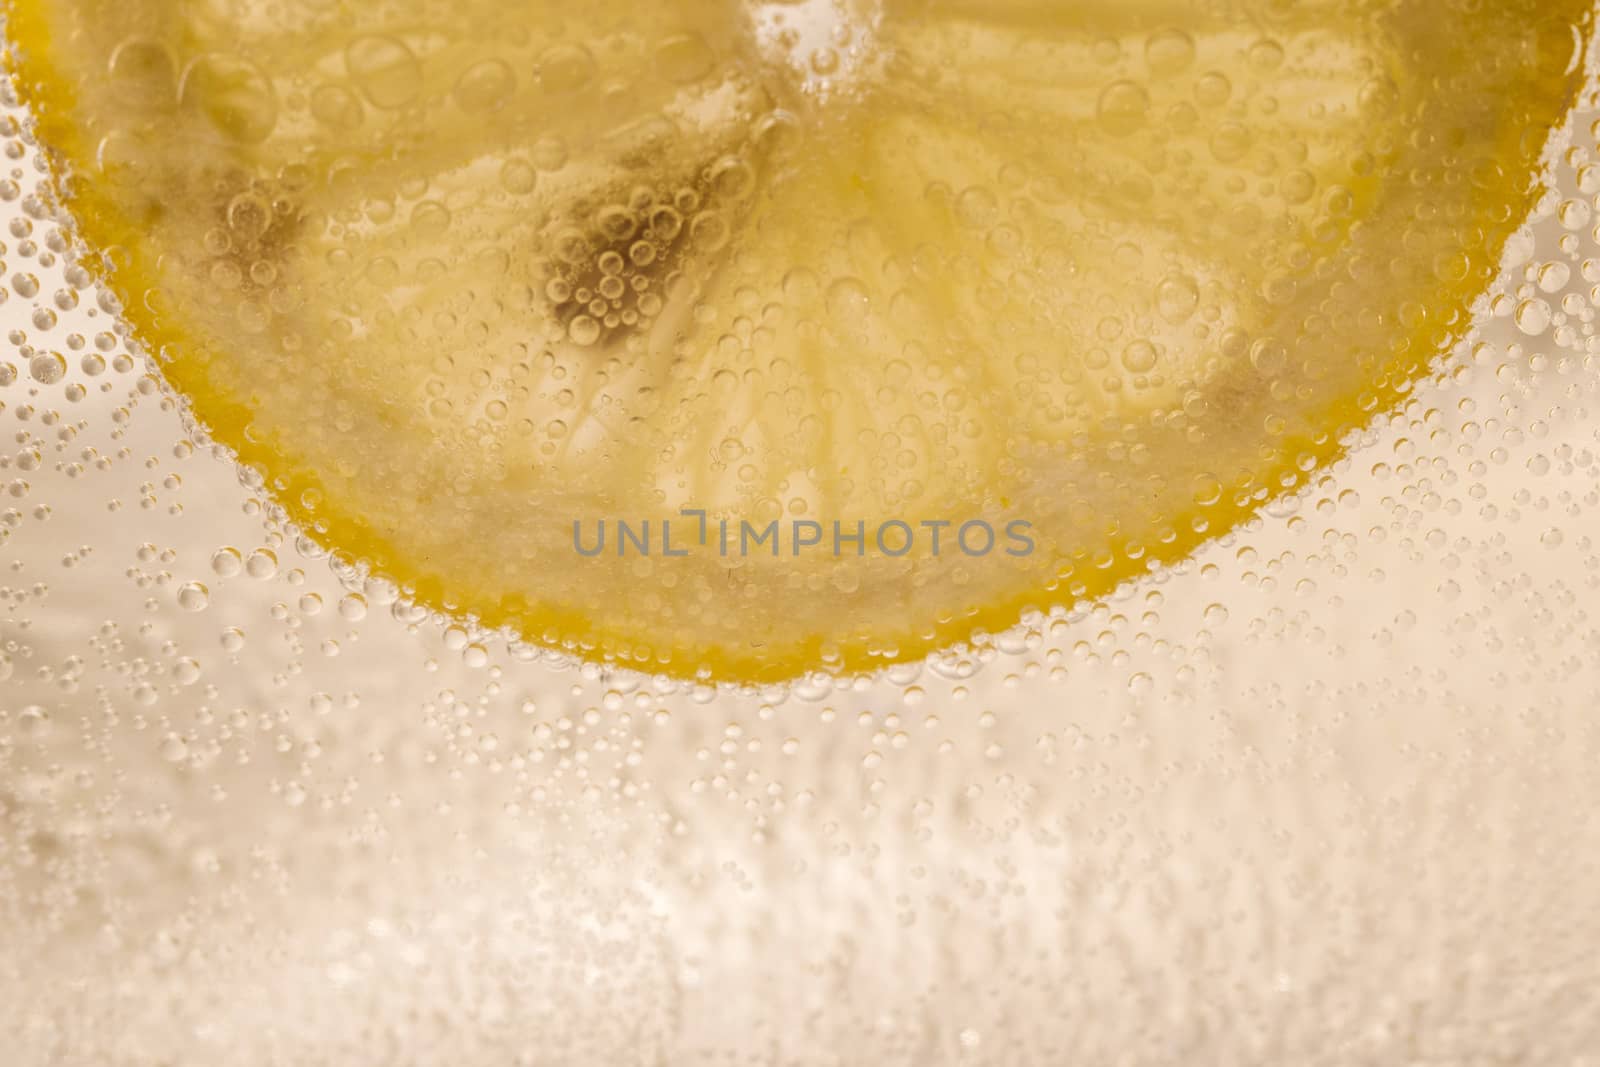 Lemon absorbed in mineral water